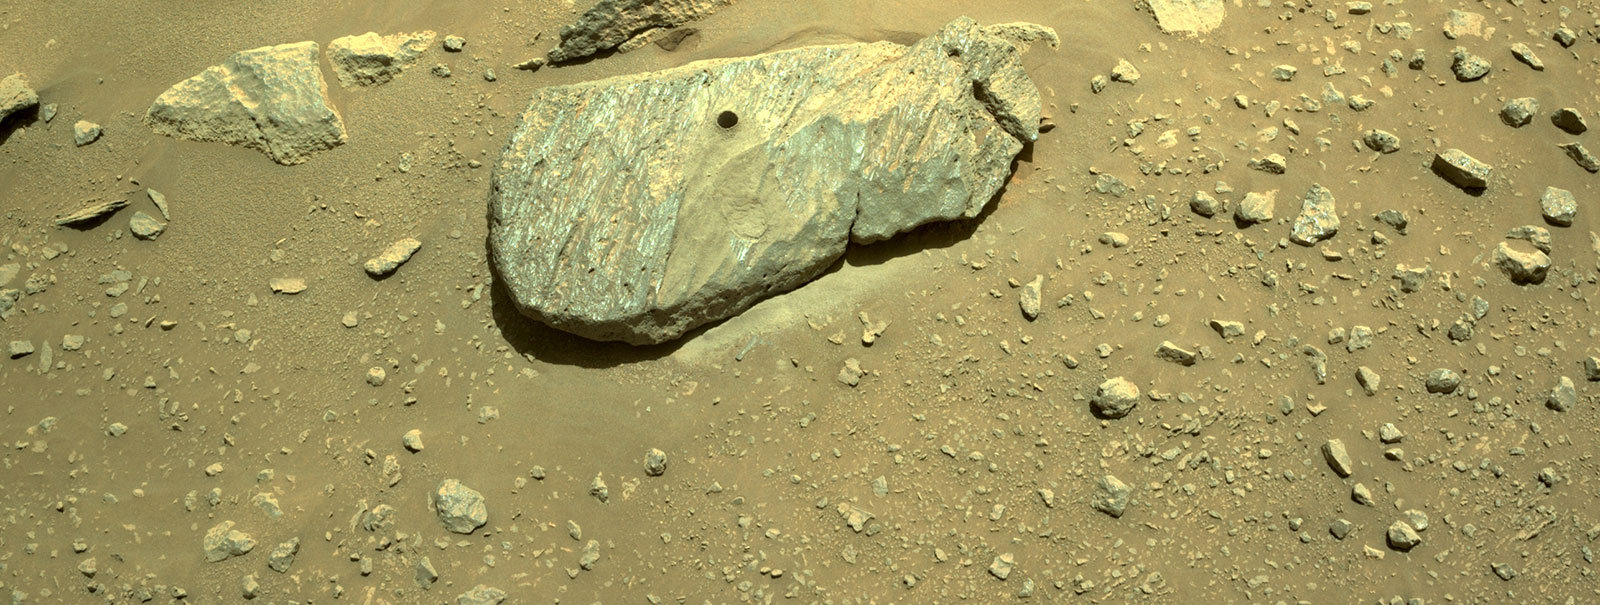 Mars rock with hole drilled by NASA's Perseverance rover.